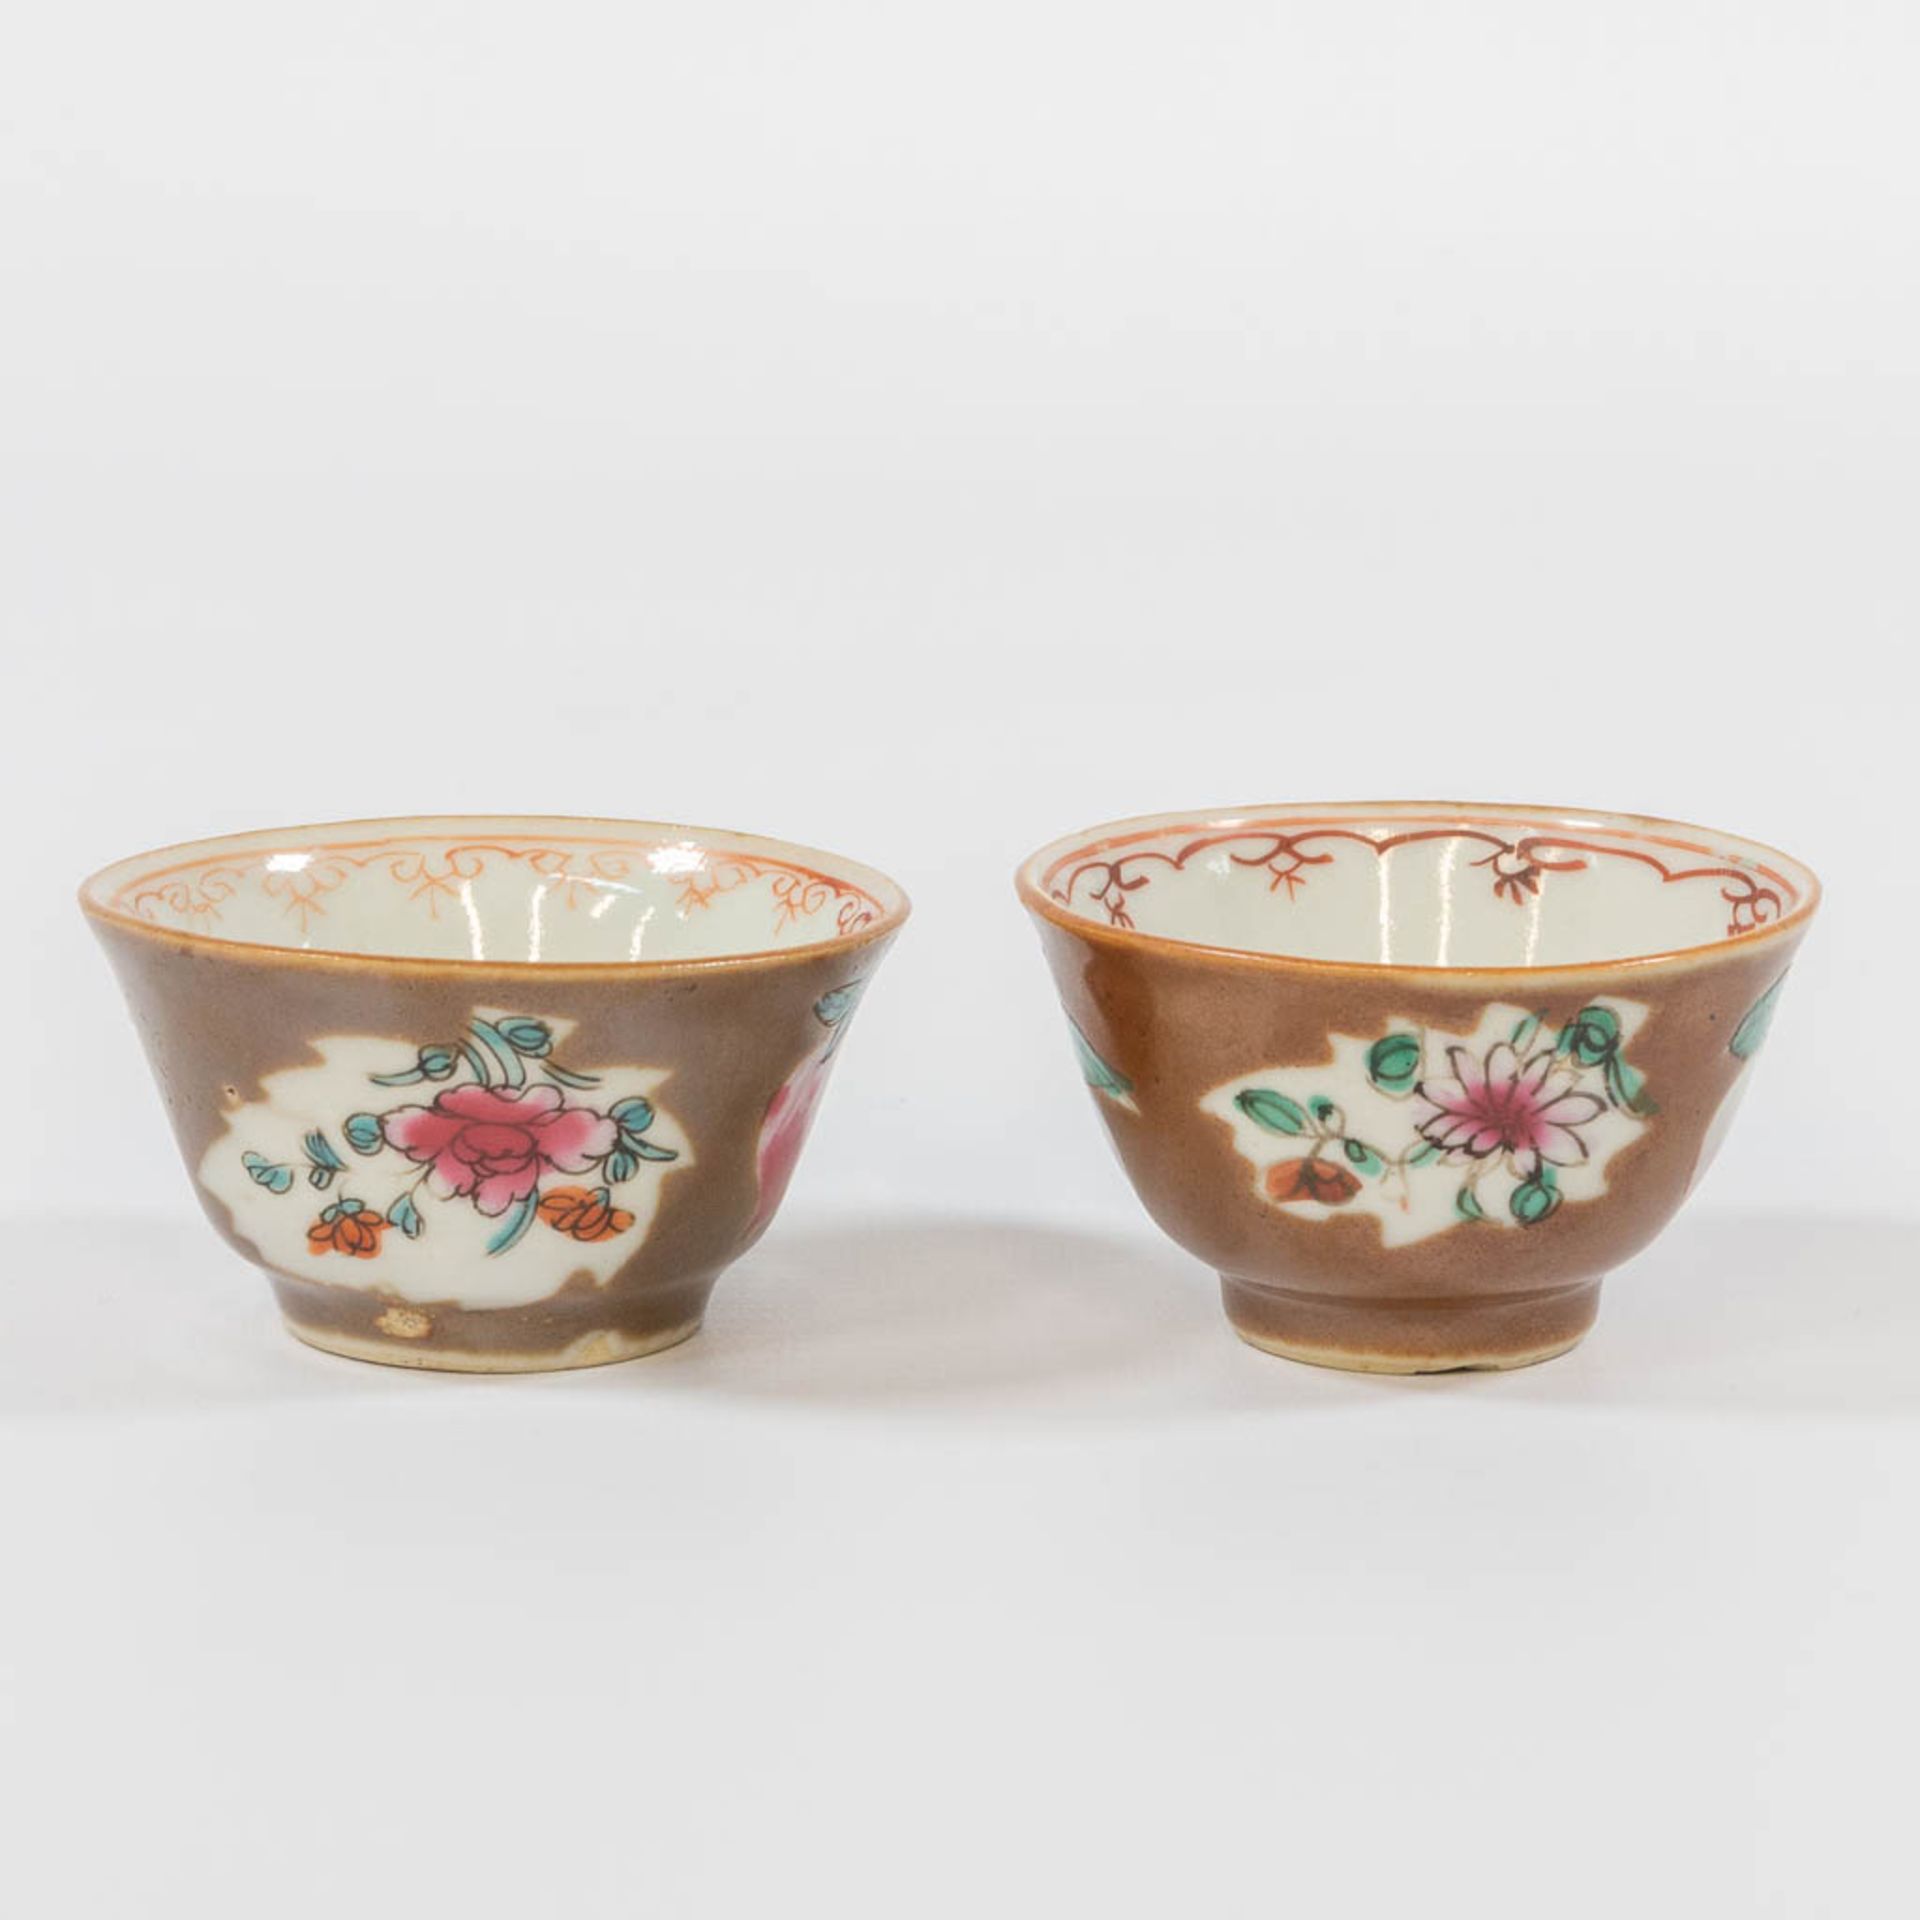 A collection of 12 Capucine Chinese porcelain items, consisting of 5 plates and 7 cups. - Image 13 of 26